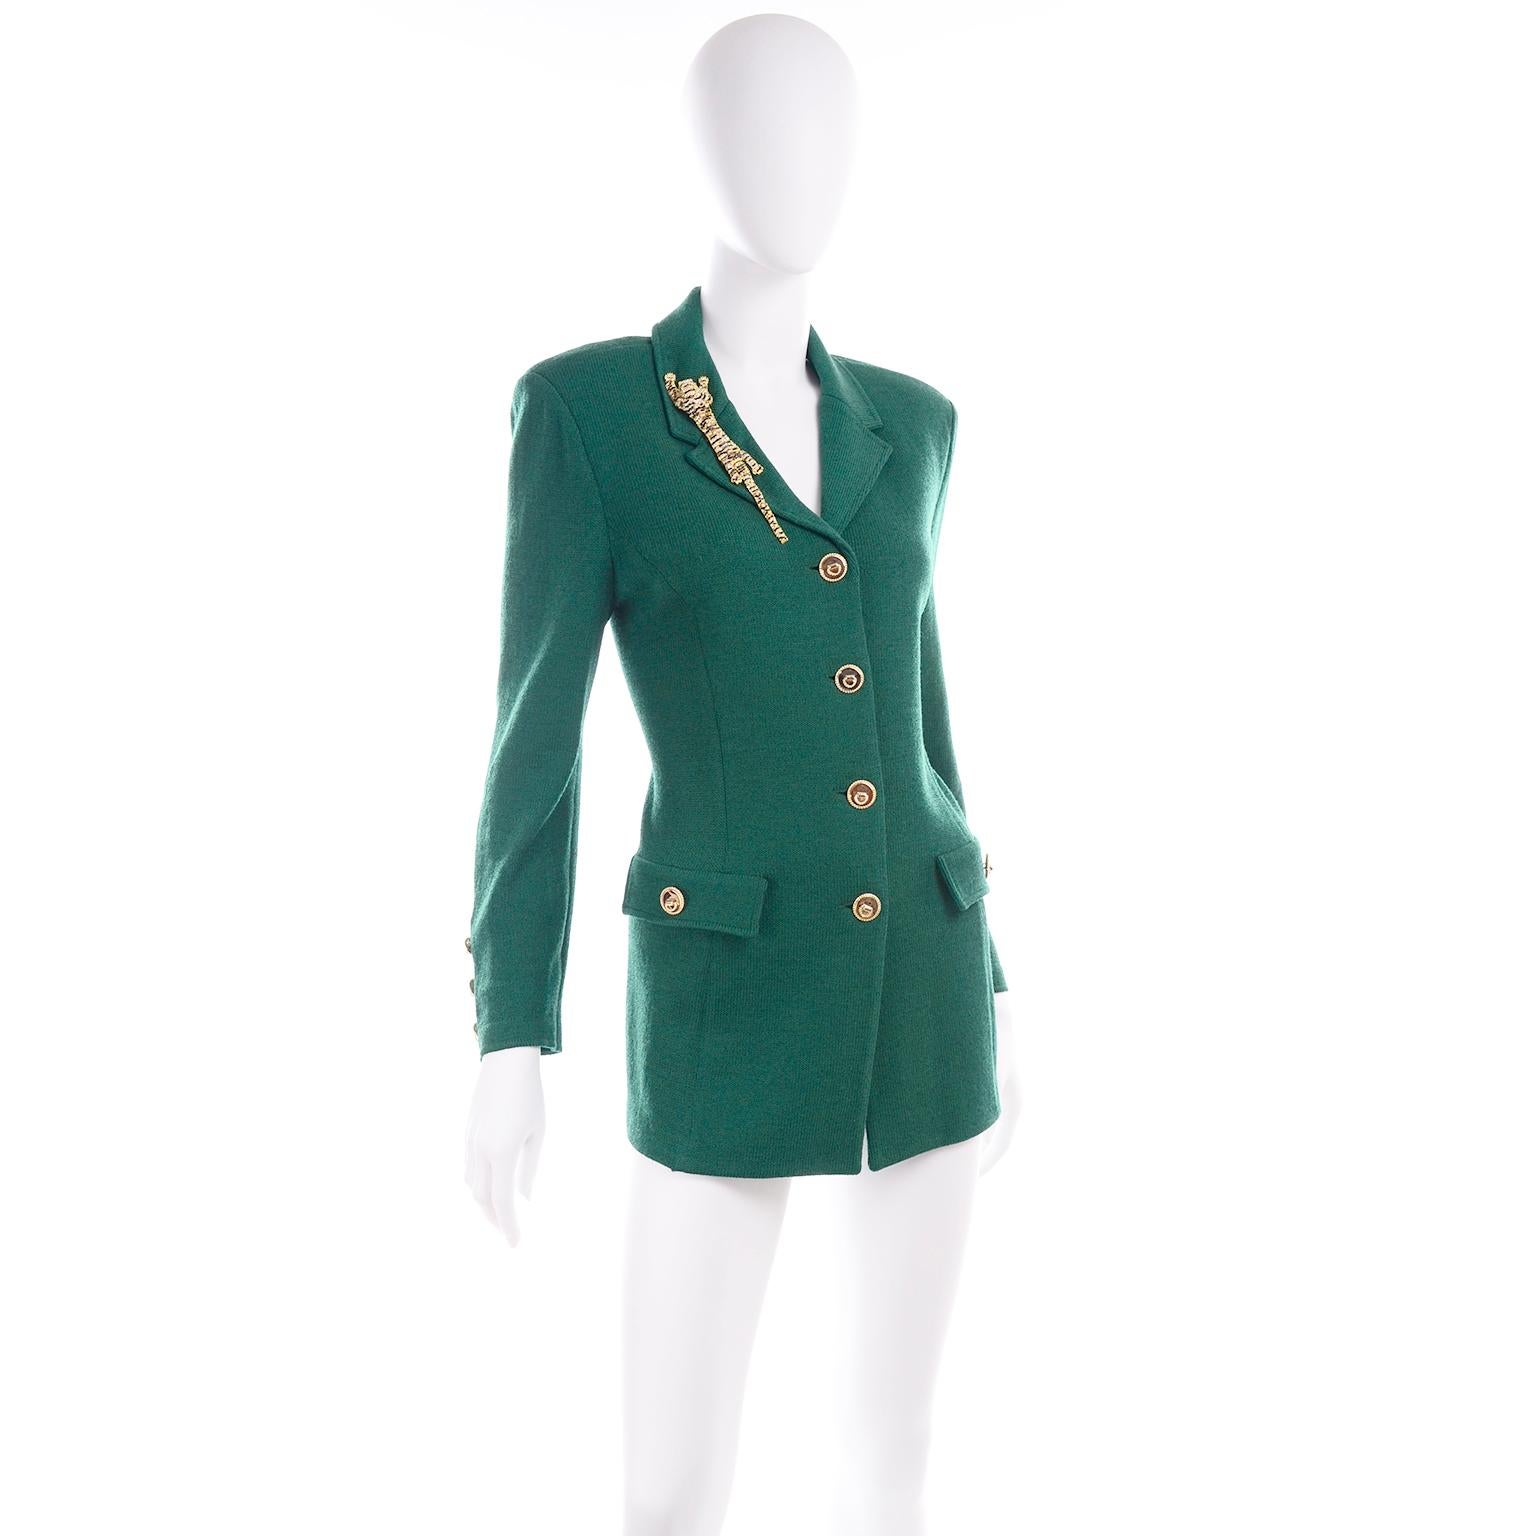 We don't often sell St.John but we fell in love with this rich green Santana knit button front jacket! Mainly, the sewn in oversized dramatic tiger brooch with black and clear rhinestones and green faceted eyes caught our eyes!  There are the St.